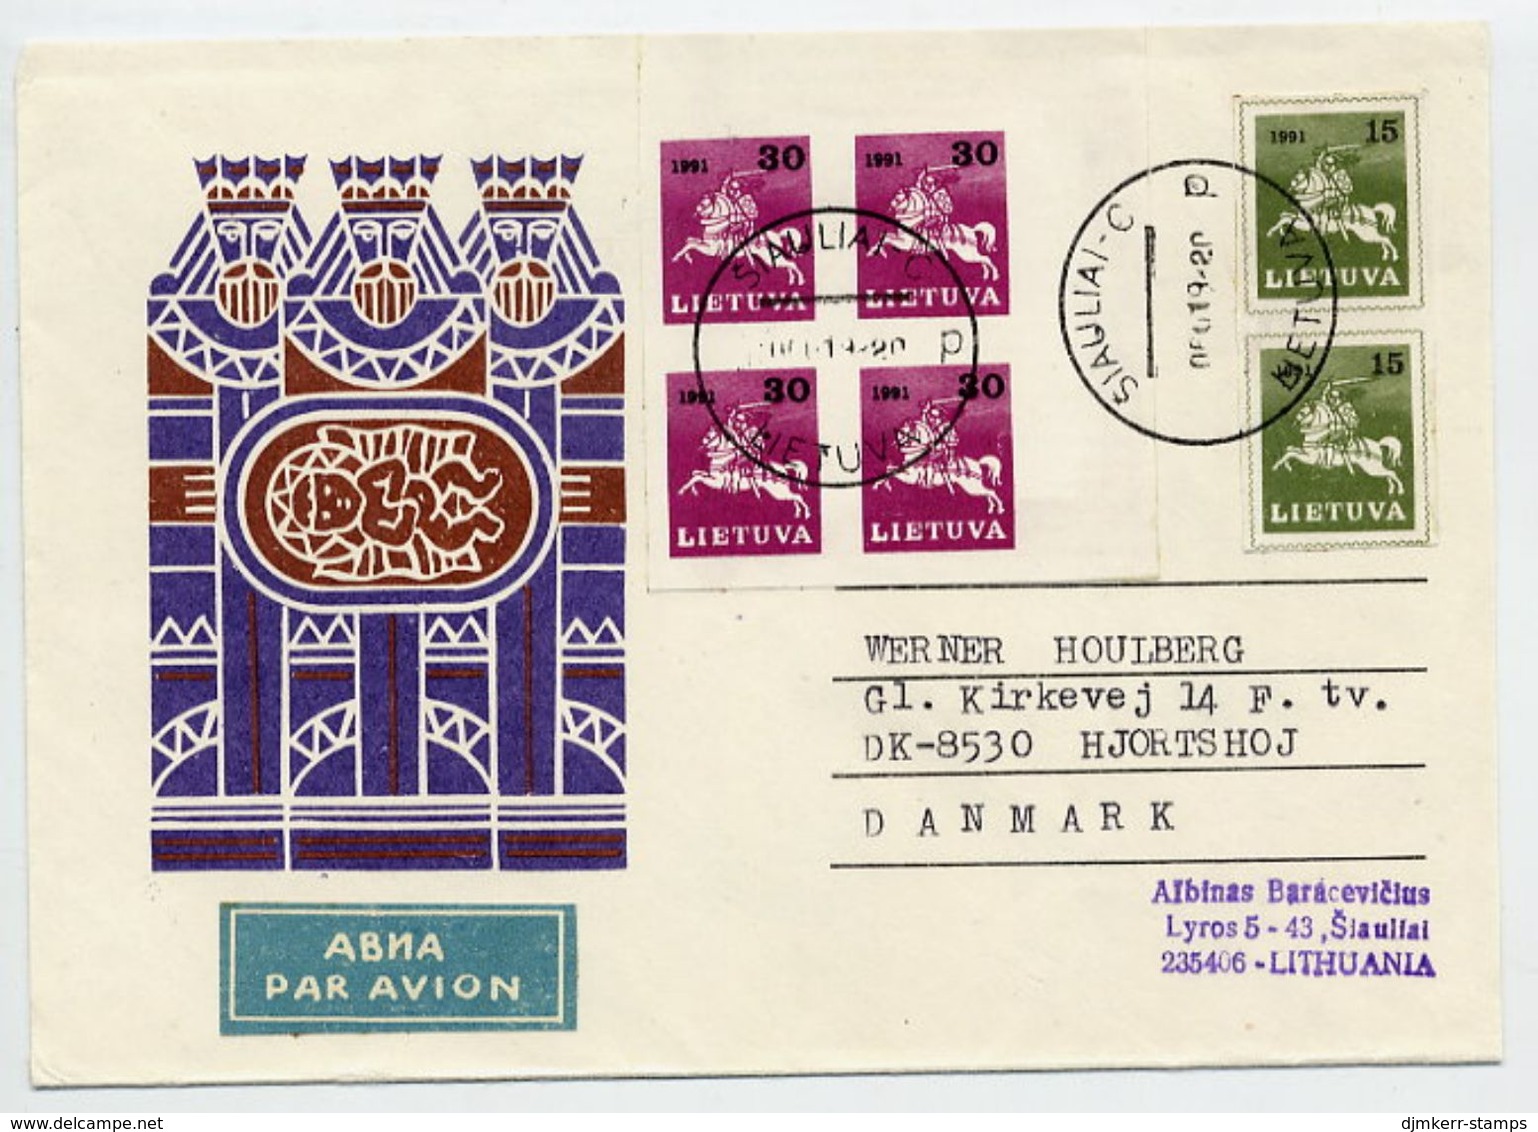 LITHUANIA 1991 Airmail Cover, Used To Denmark.  Michel 472, 481 - Litouwen